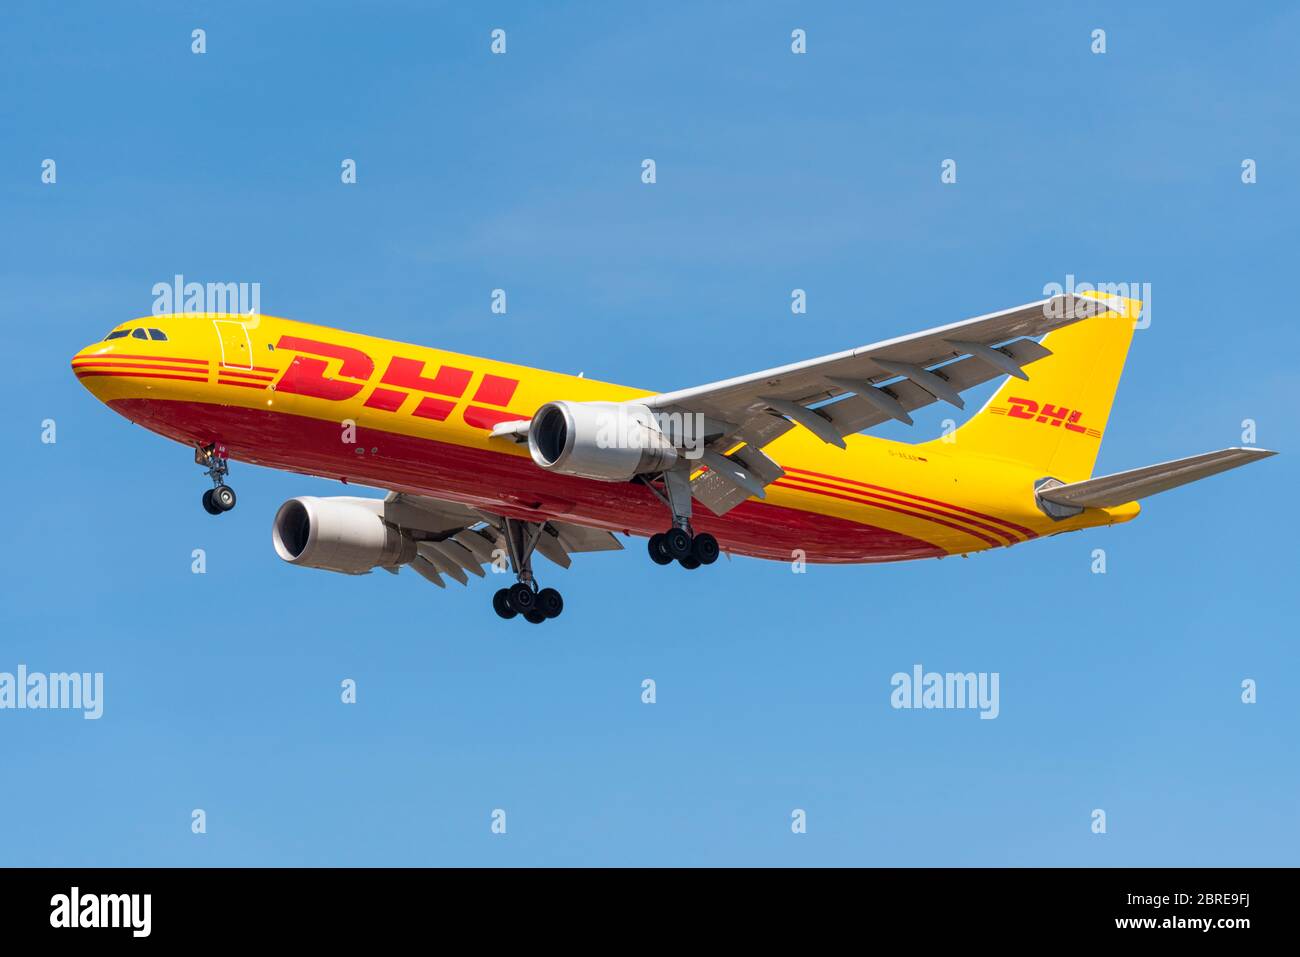 EAT Leipzig DHL Airbus A300 cargo jet airliner plane landing at London Heathrow Airport over Cranford, London, UK during COVID-19 lockdown. Stock Photo